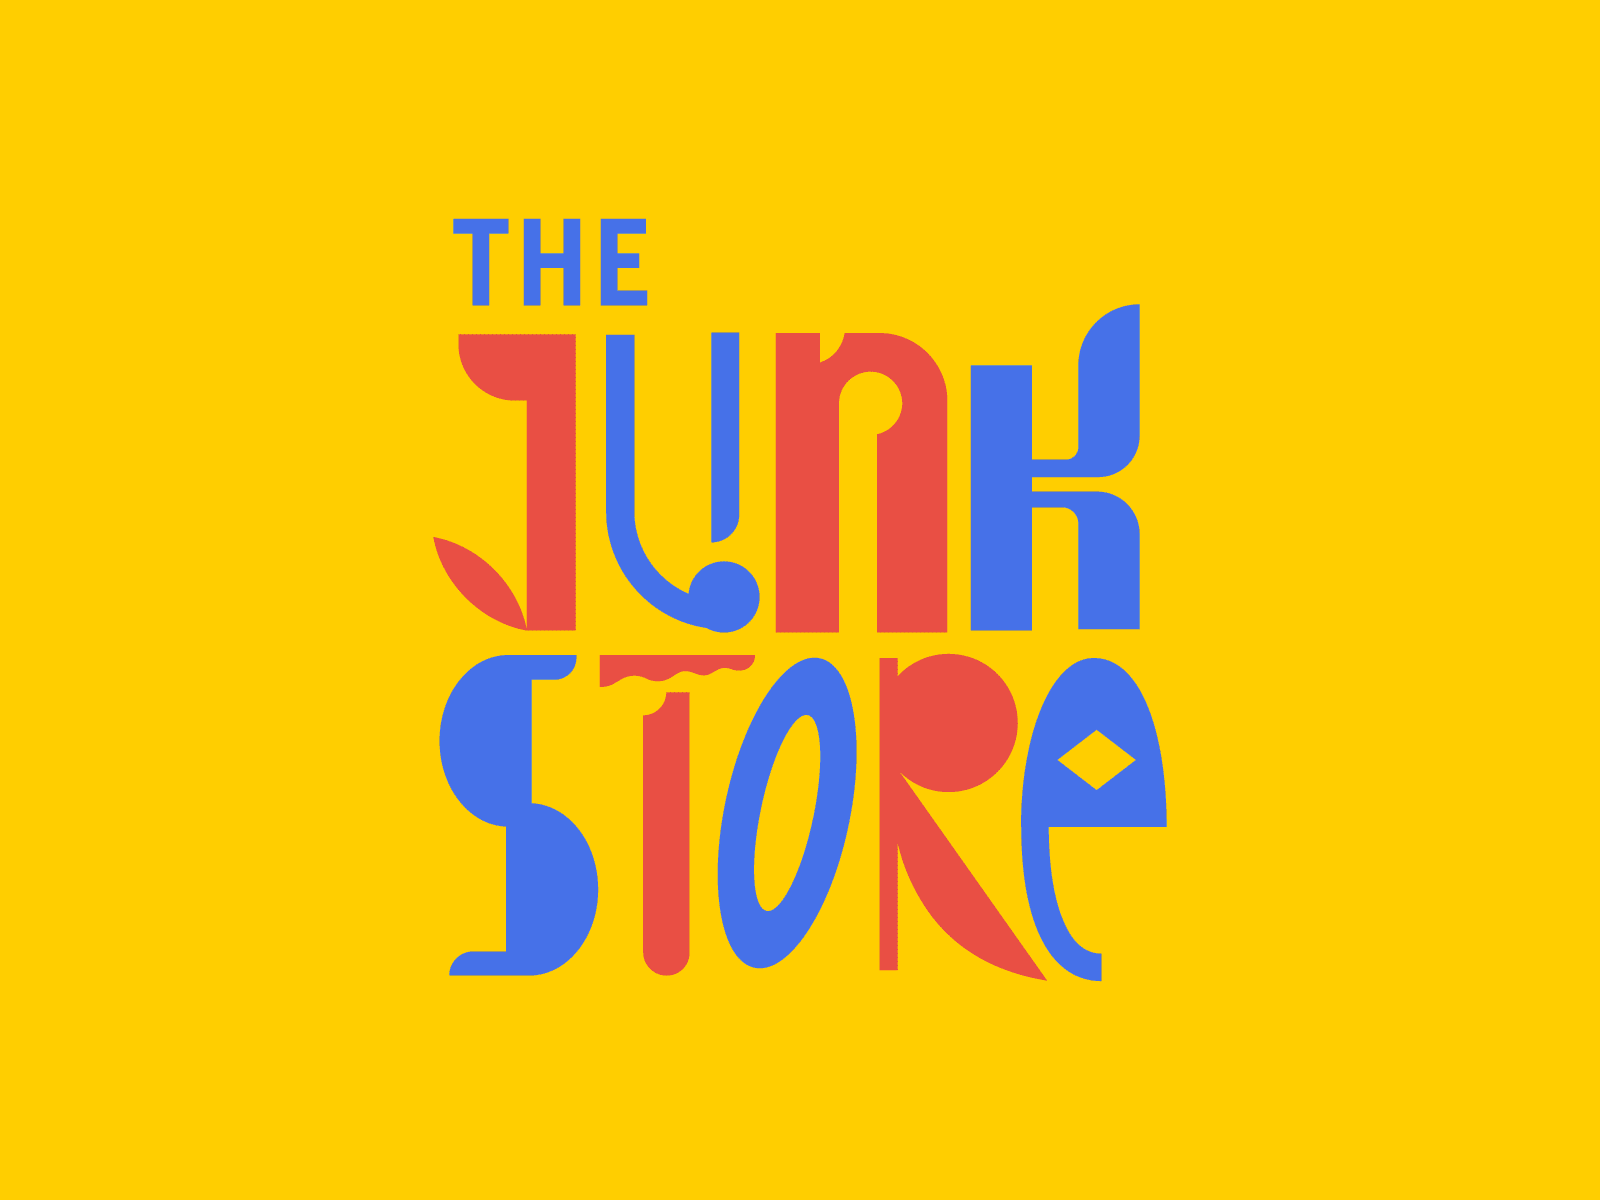 junk-store-branding-by-russell-pritchard-on-dribbble